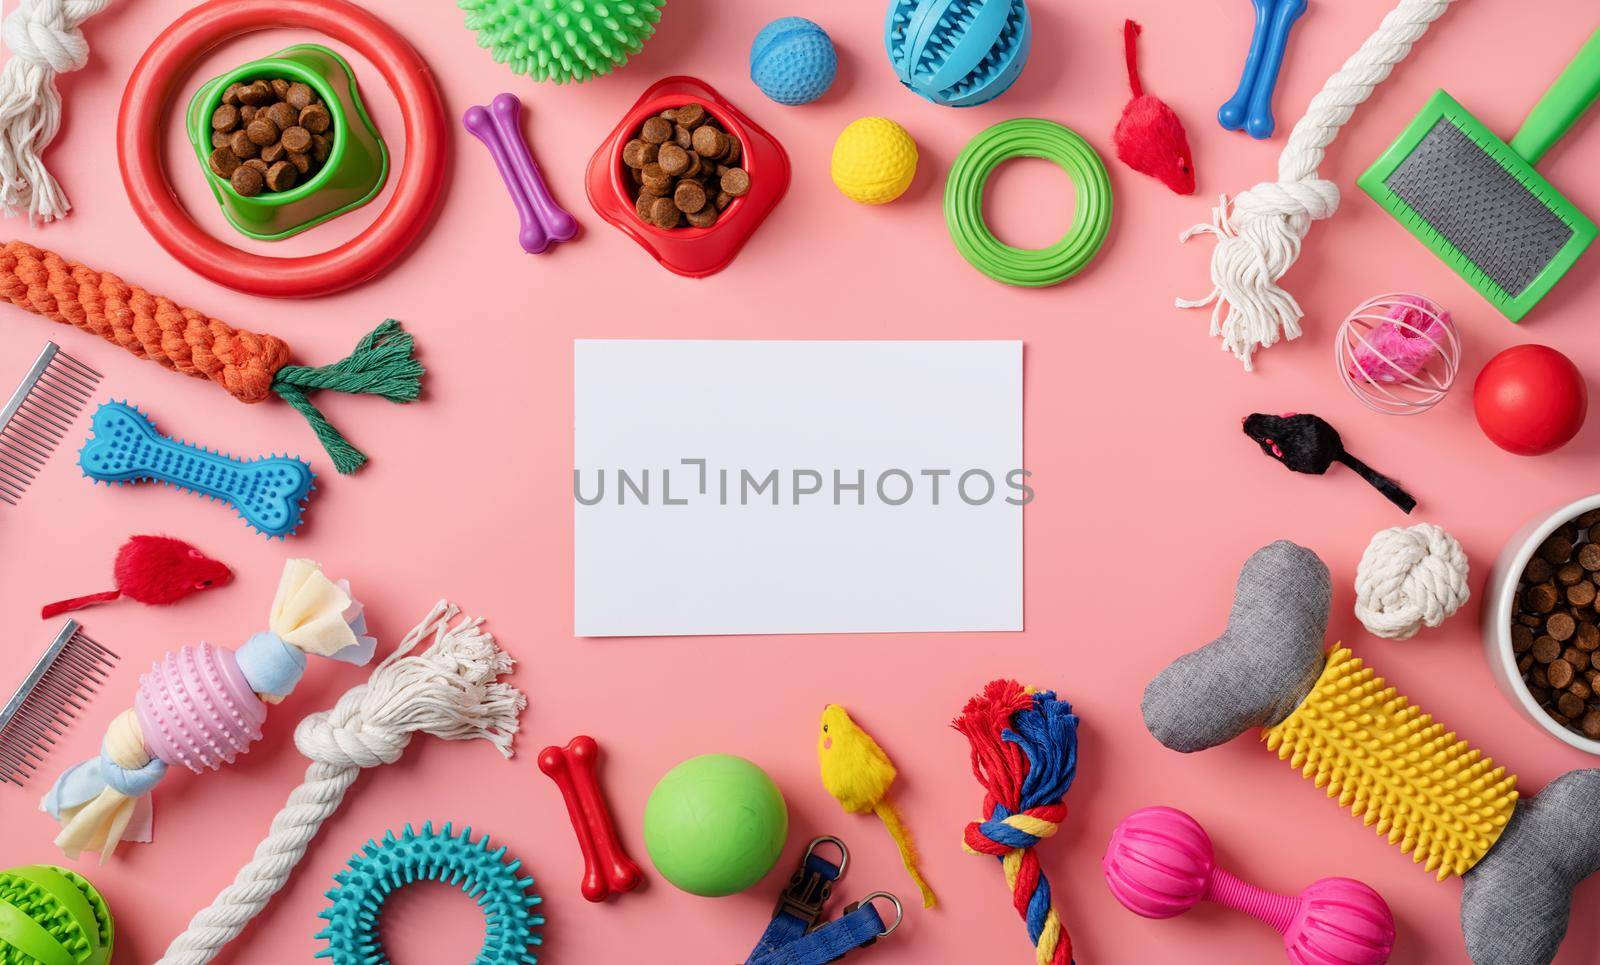 Pet care concept, various pet accessories and tools, toys, balls, brushes on pink background with blank paper for mockup design, flat lay